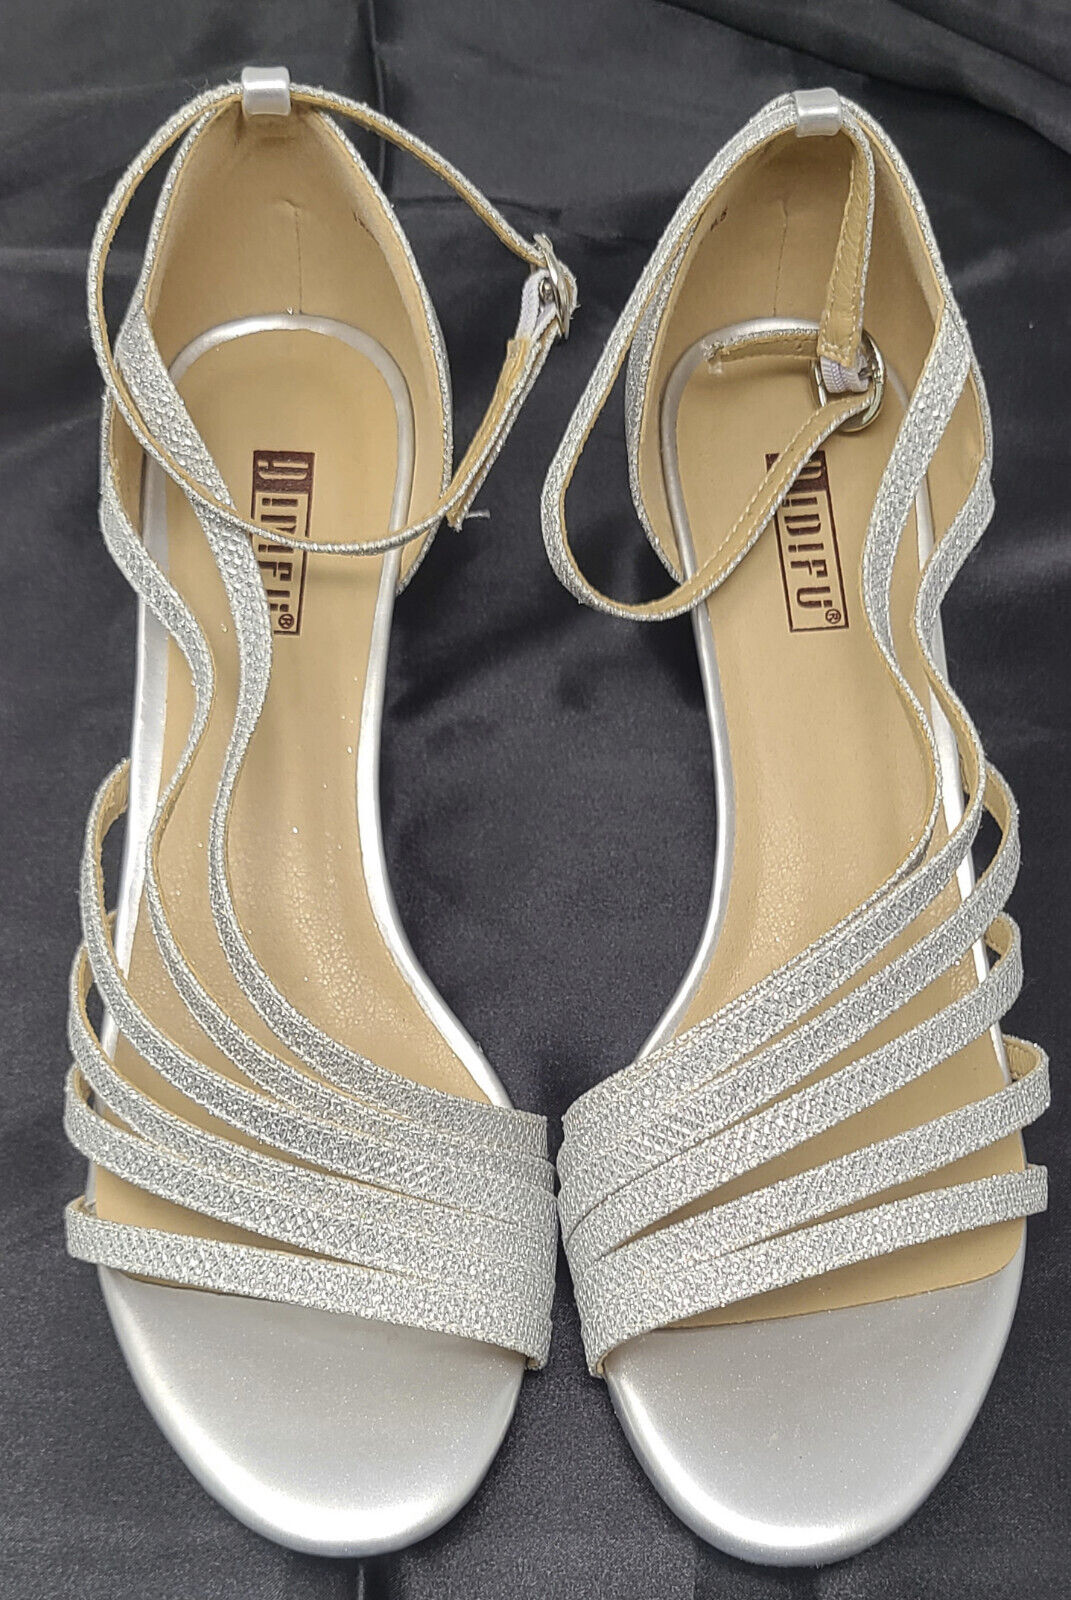 Silver Strappy High Heels - Knotted High Heels - Silver Heels - Lulus